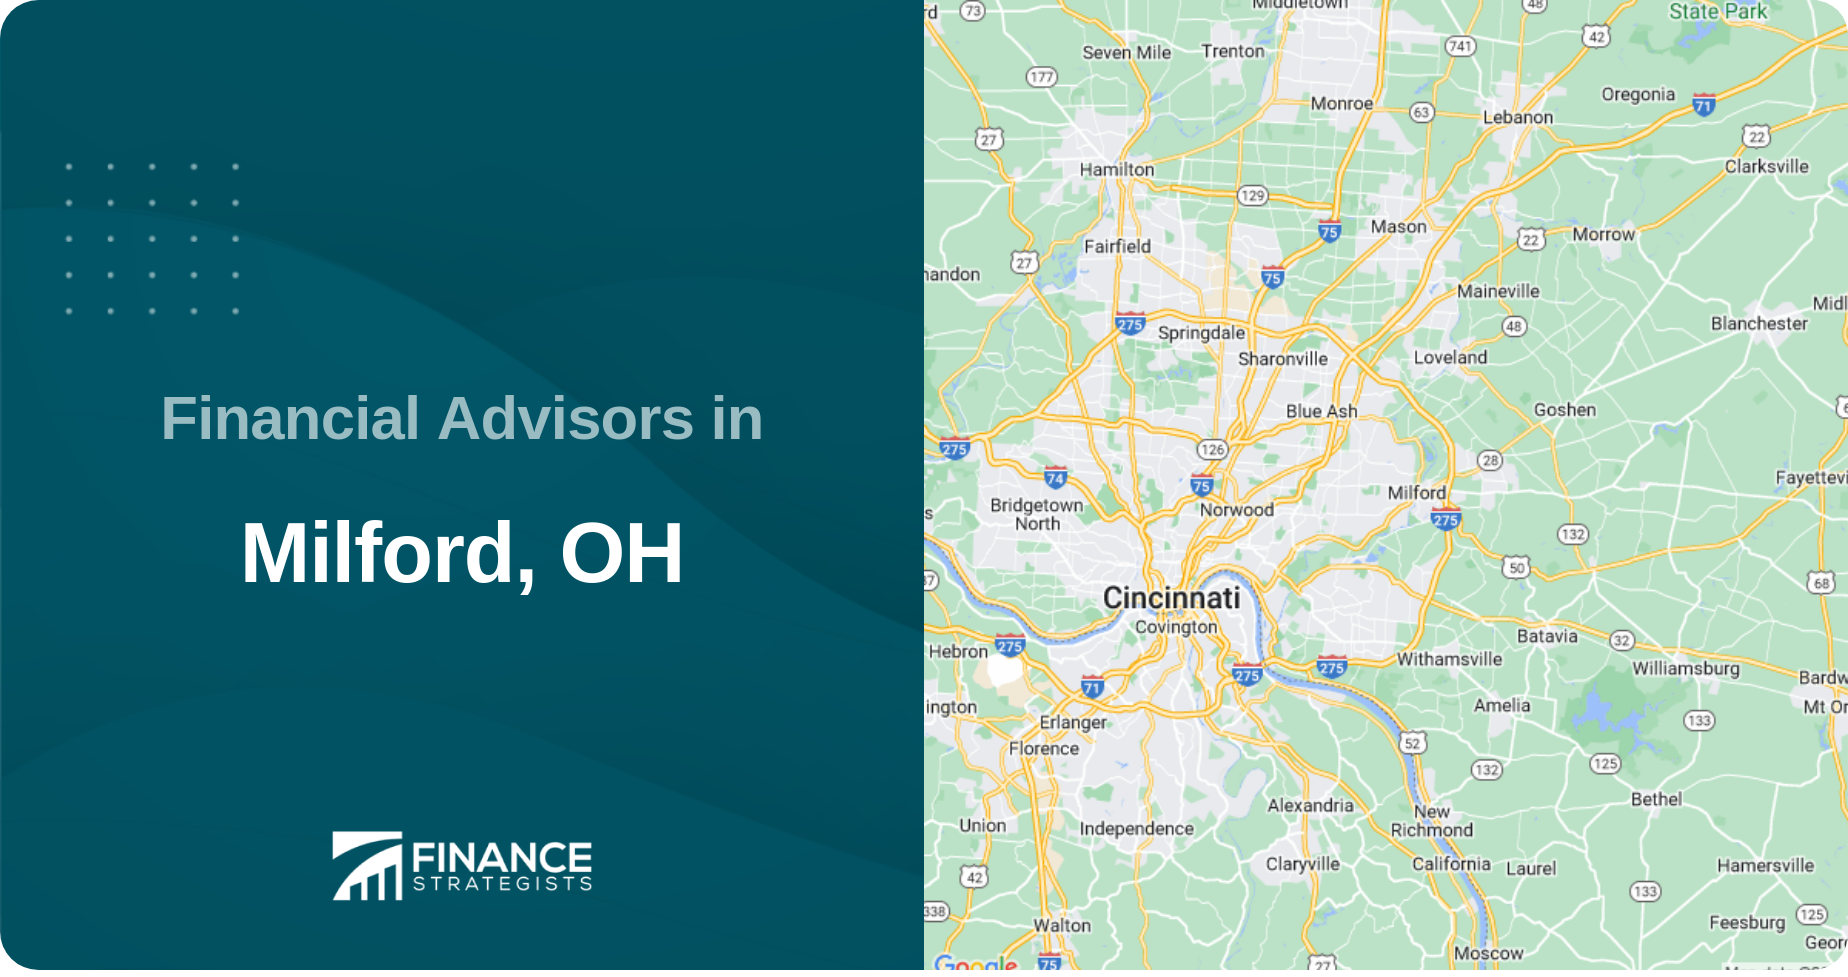 Financial Advisors in Milford, OH